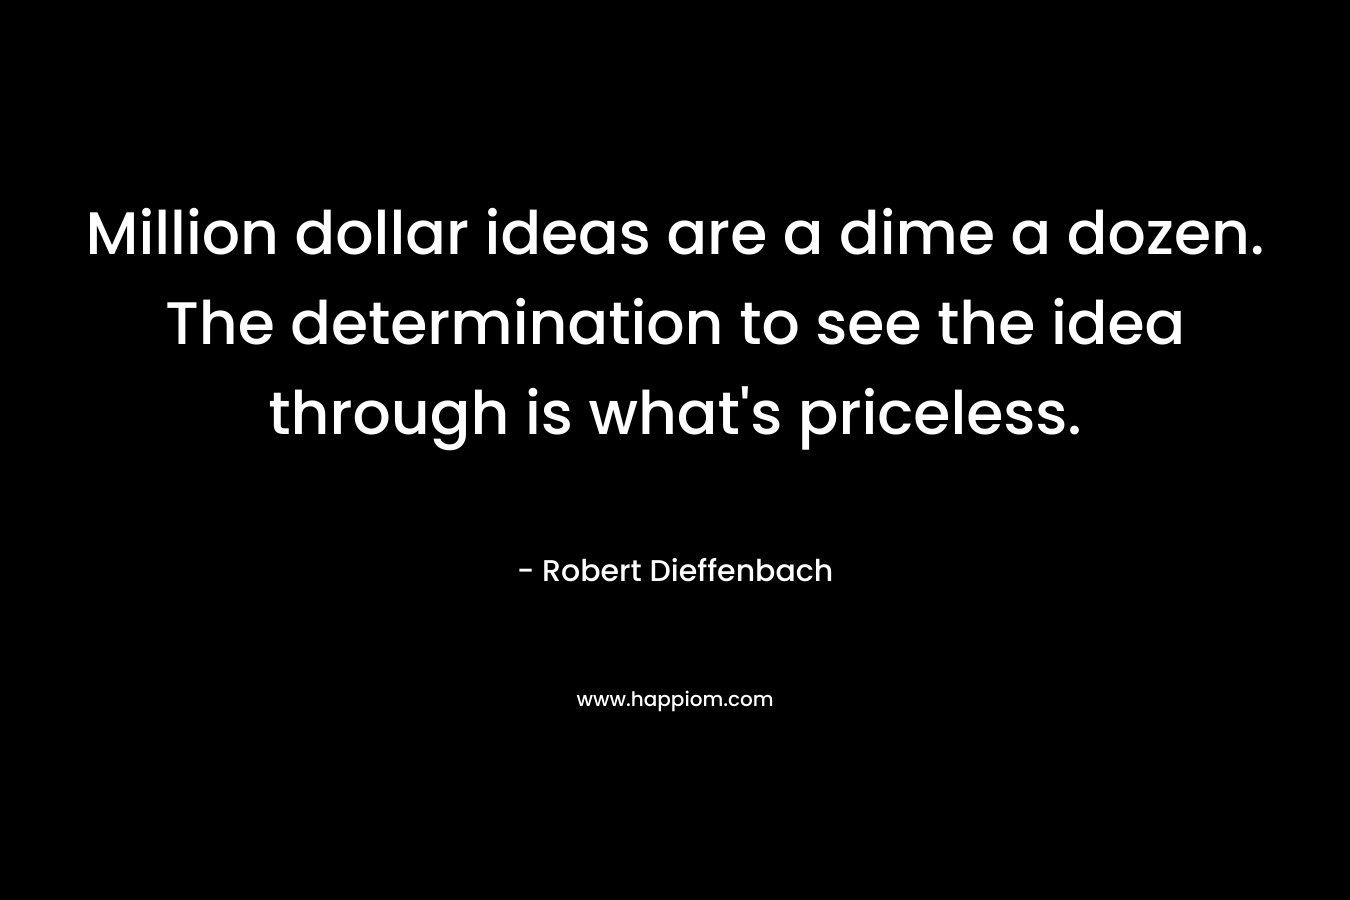 Million dollar ideas are a dime a dozen. The determination to see the idea through is what’s priceless. – Robert Dieffenbach